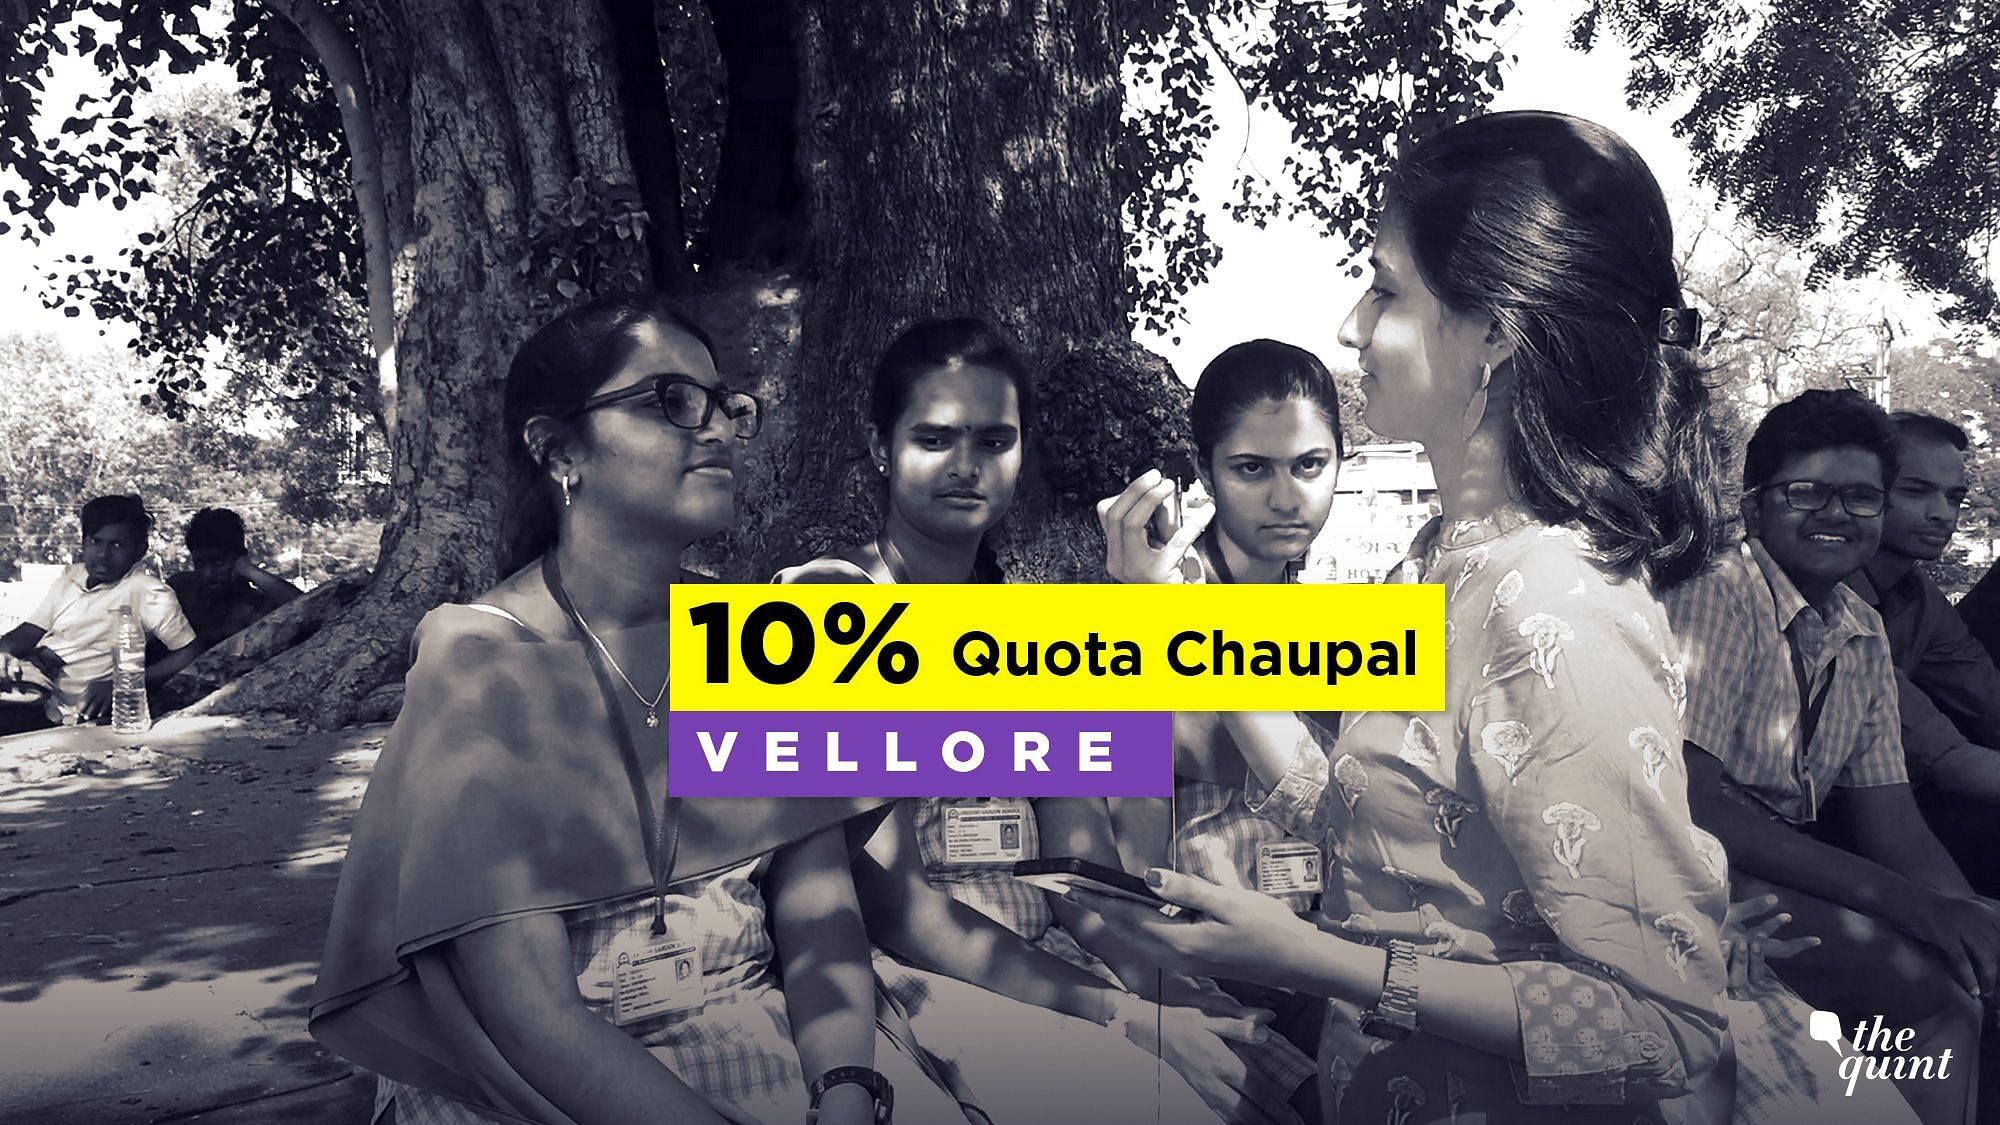 The Quint, in its special Chaupal series, travelled to Vellore in Tamil Nadu to find out if people approve of the government’s move and how this will change the reservation game in the state.